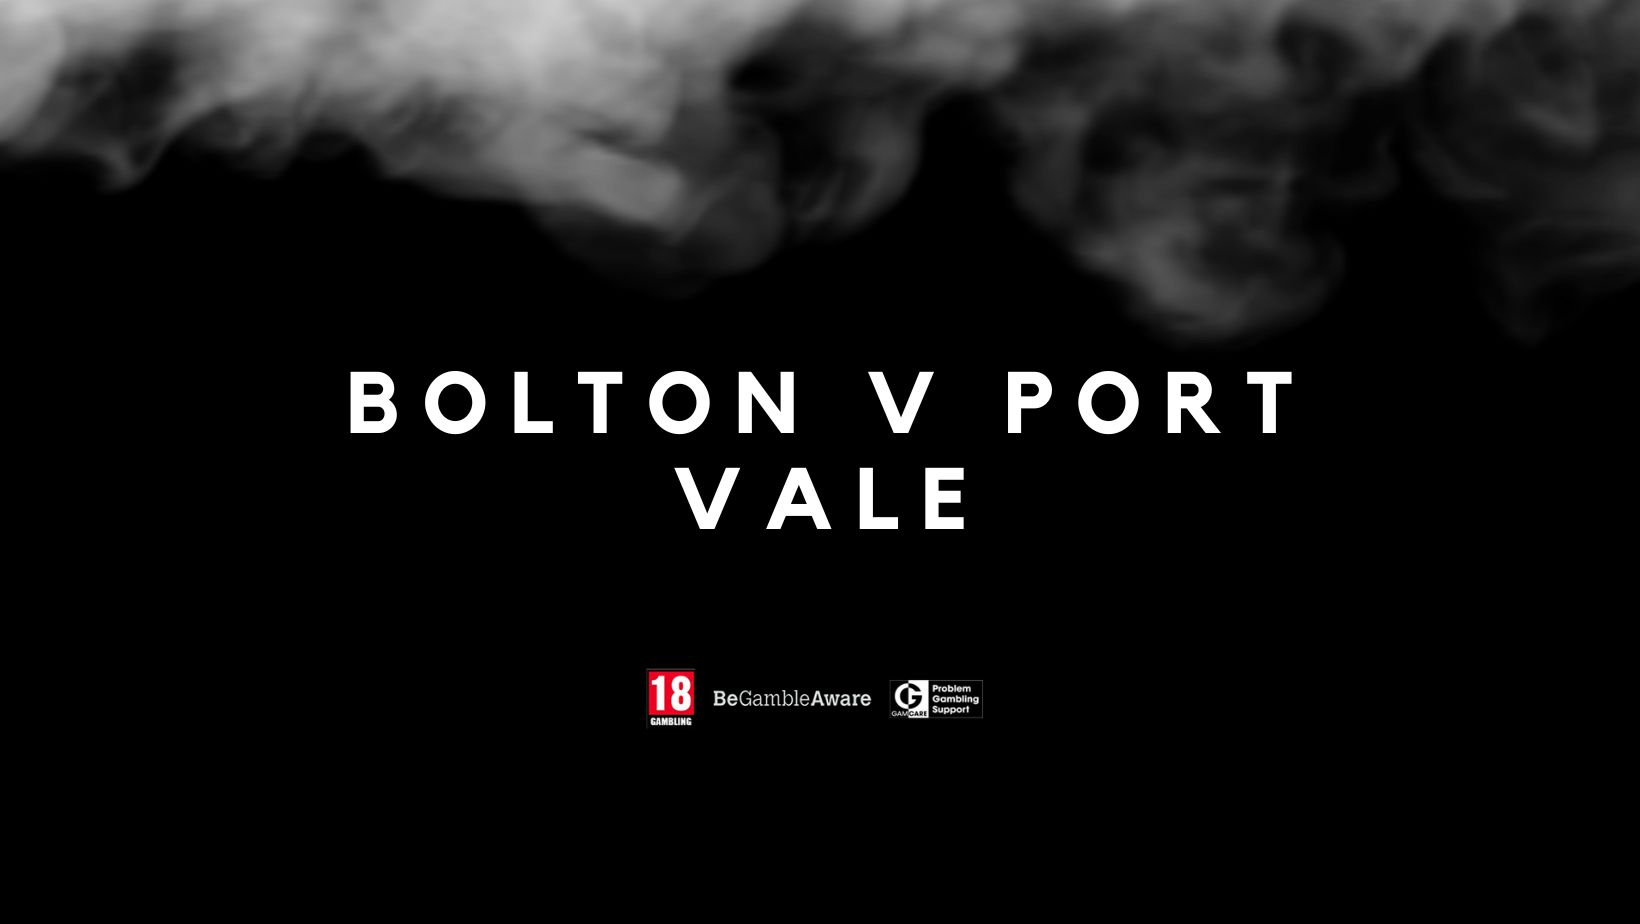 Bolton v Port Vale live streaming – where to watch on TV